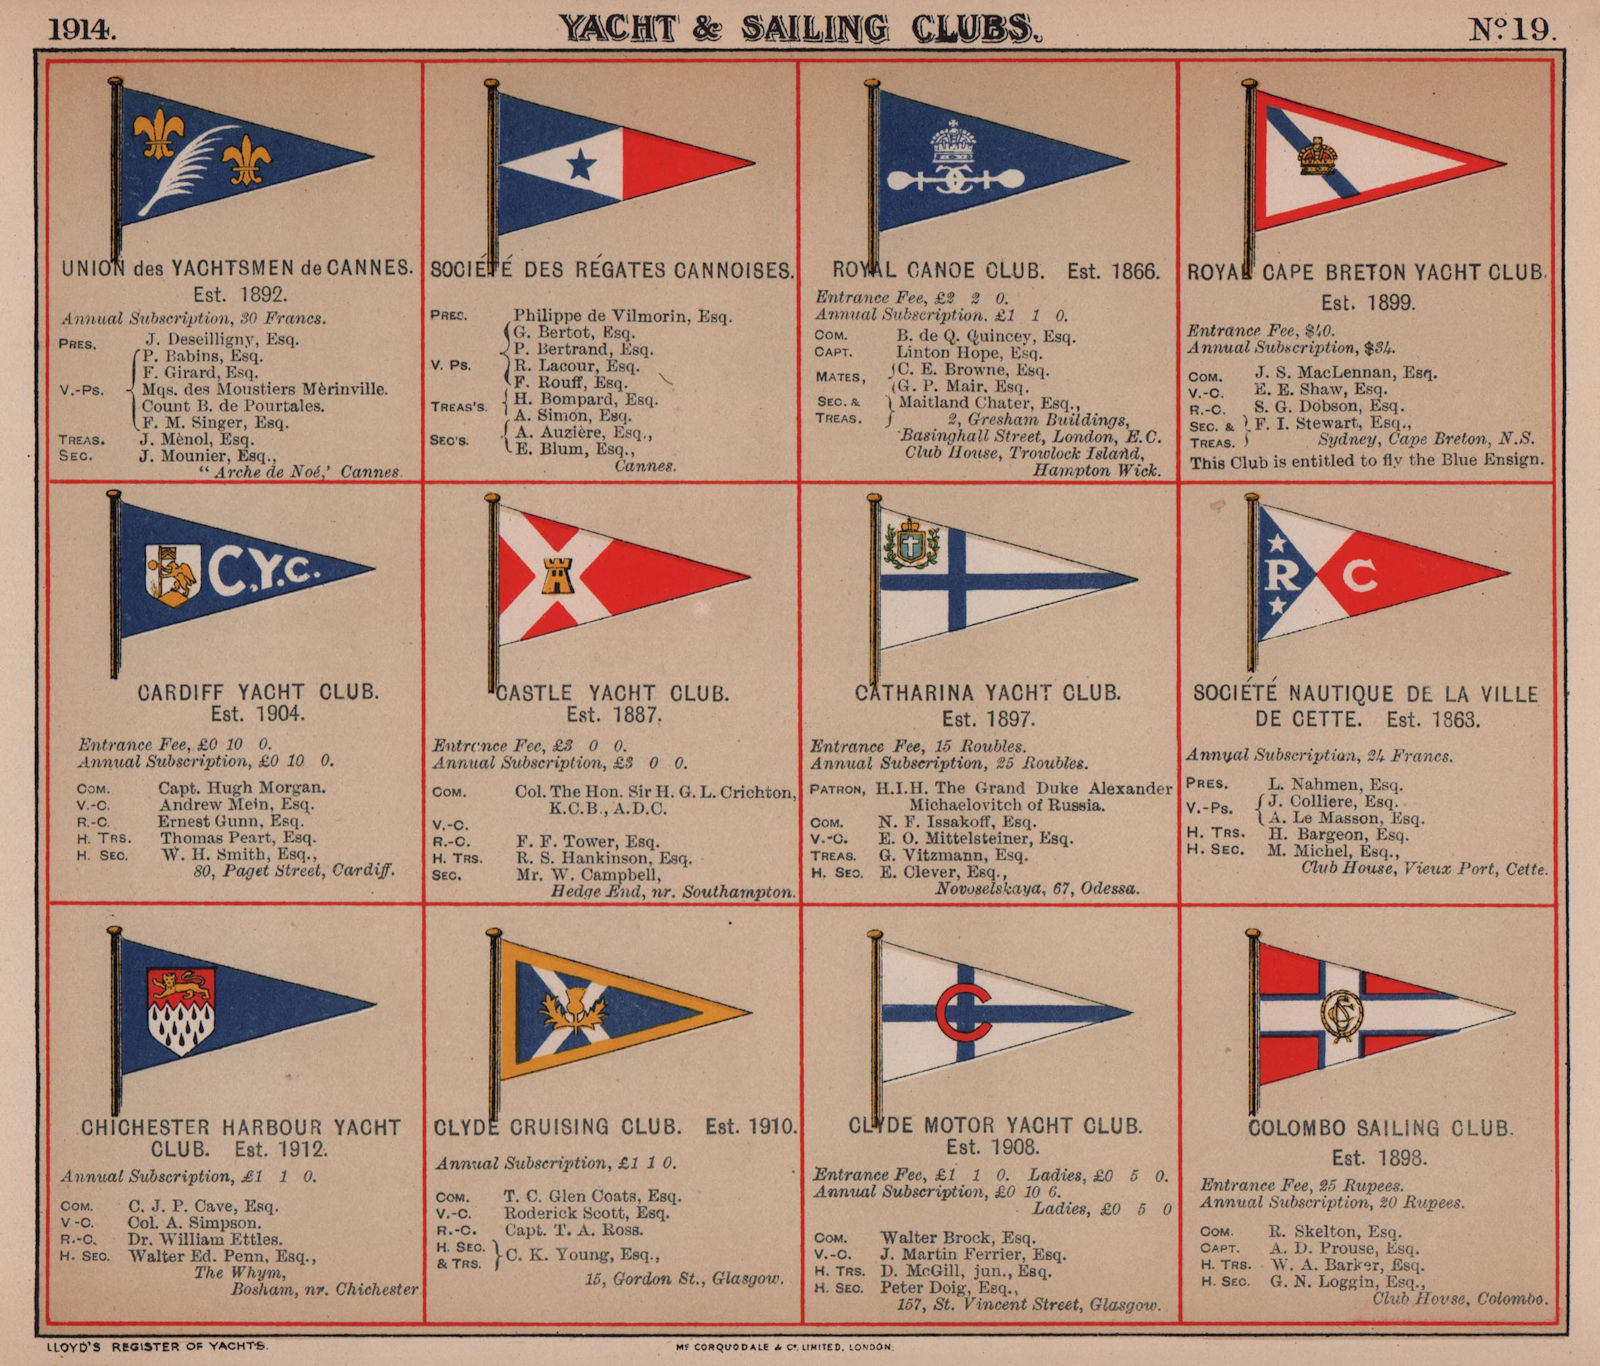 YACHT & SAILING CLUB FLAGS C Cannes Cardiff Catharina Chichester Colombo 1914